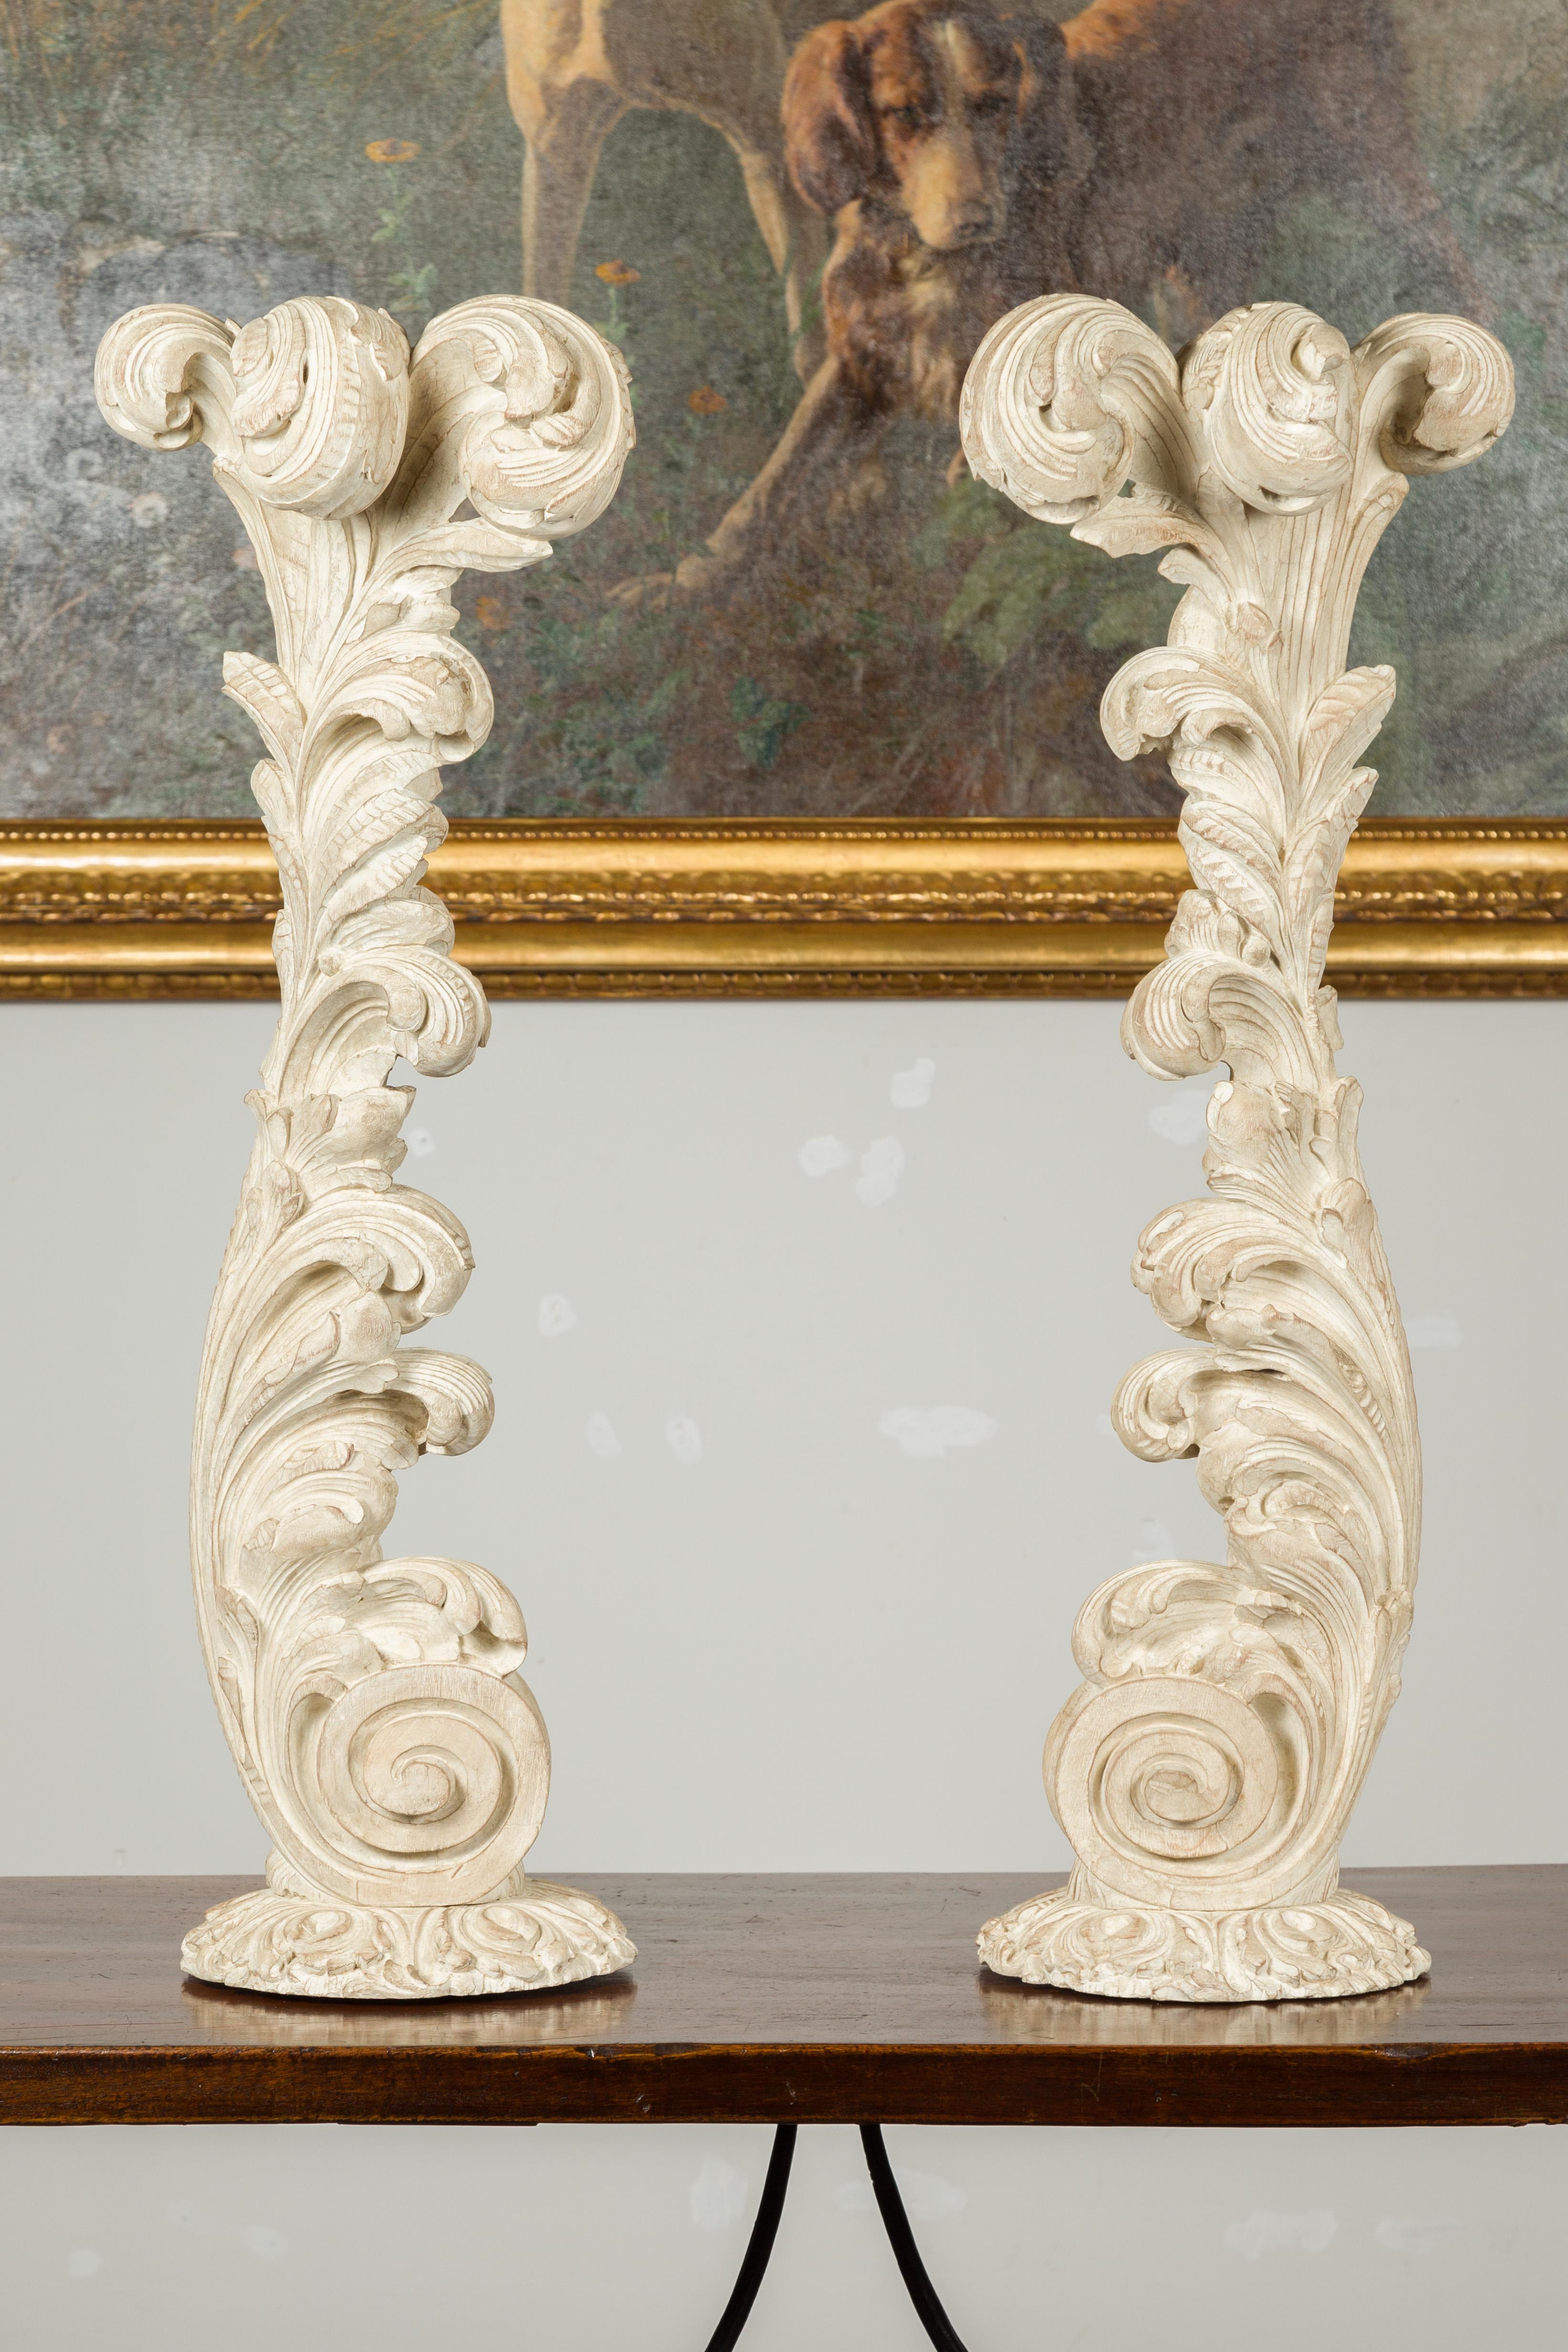 A pair of Maison Jansen carved wooden fragments from the mid 20th century, depicting scrolling foliage on circular base. Created in France by Maison Jansen during the second quarter of the 20th century, this pair of large wooden fragments charms us